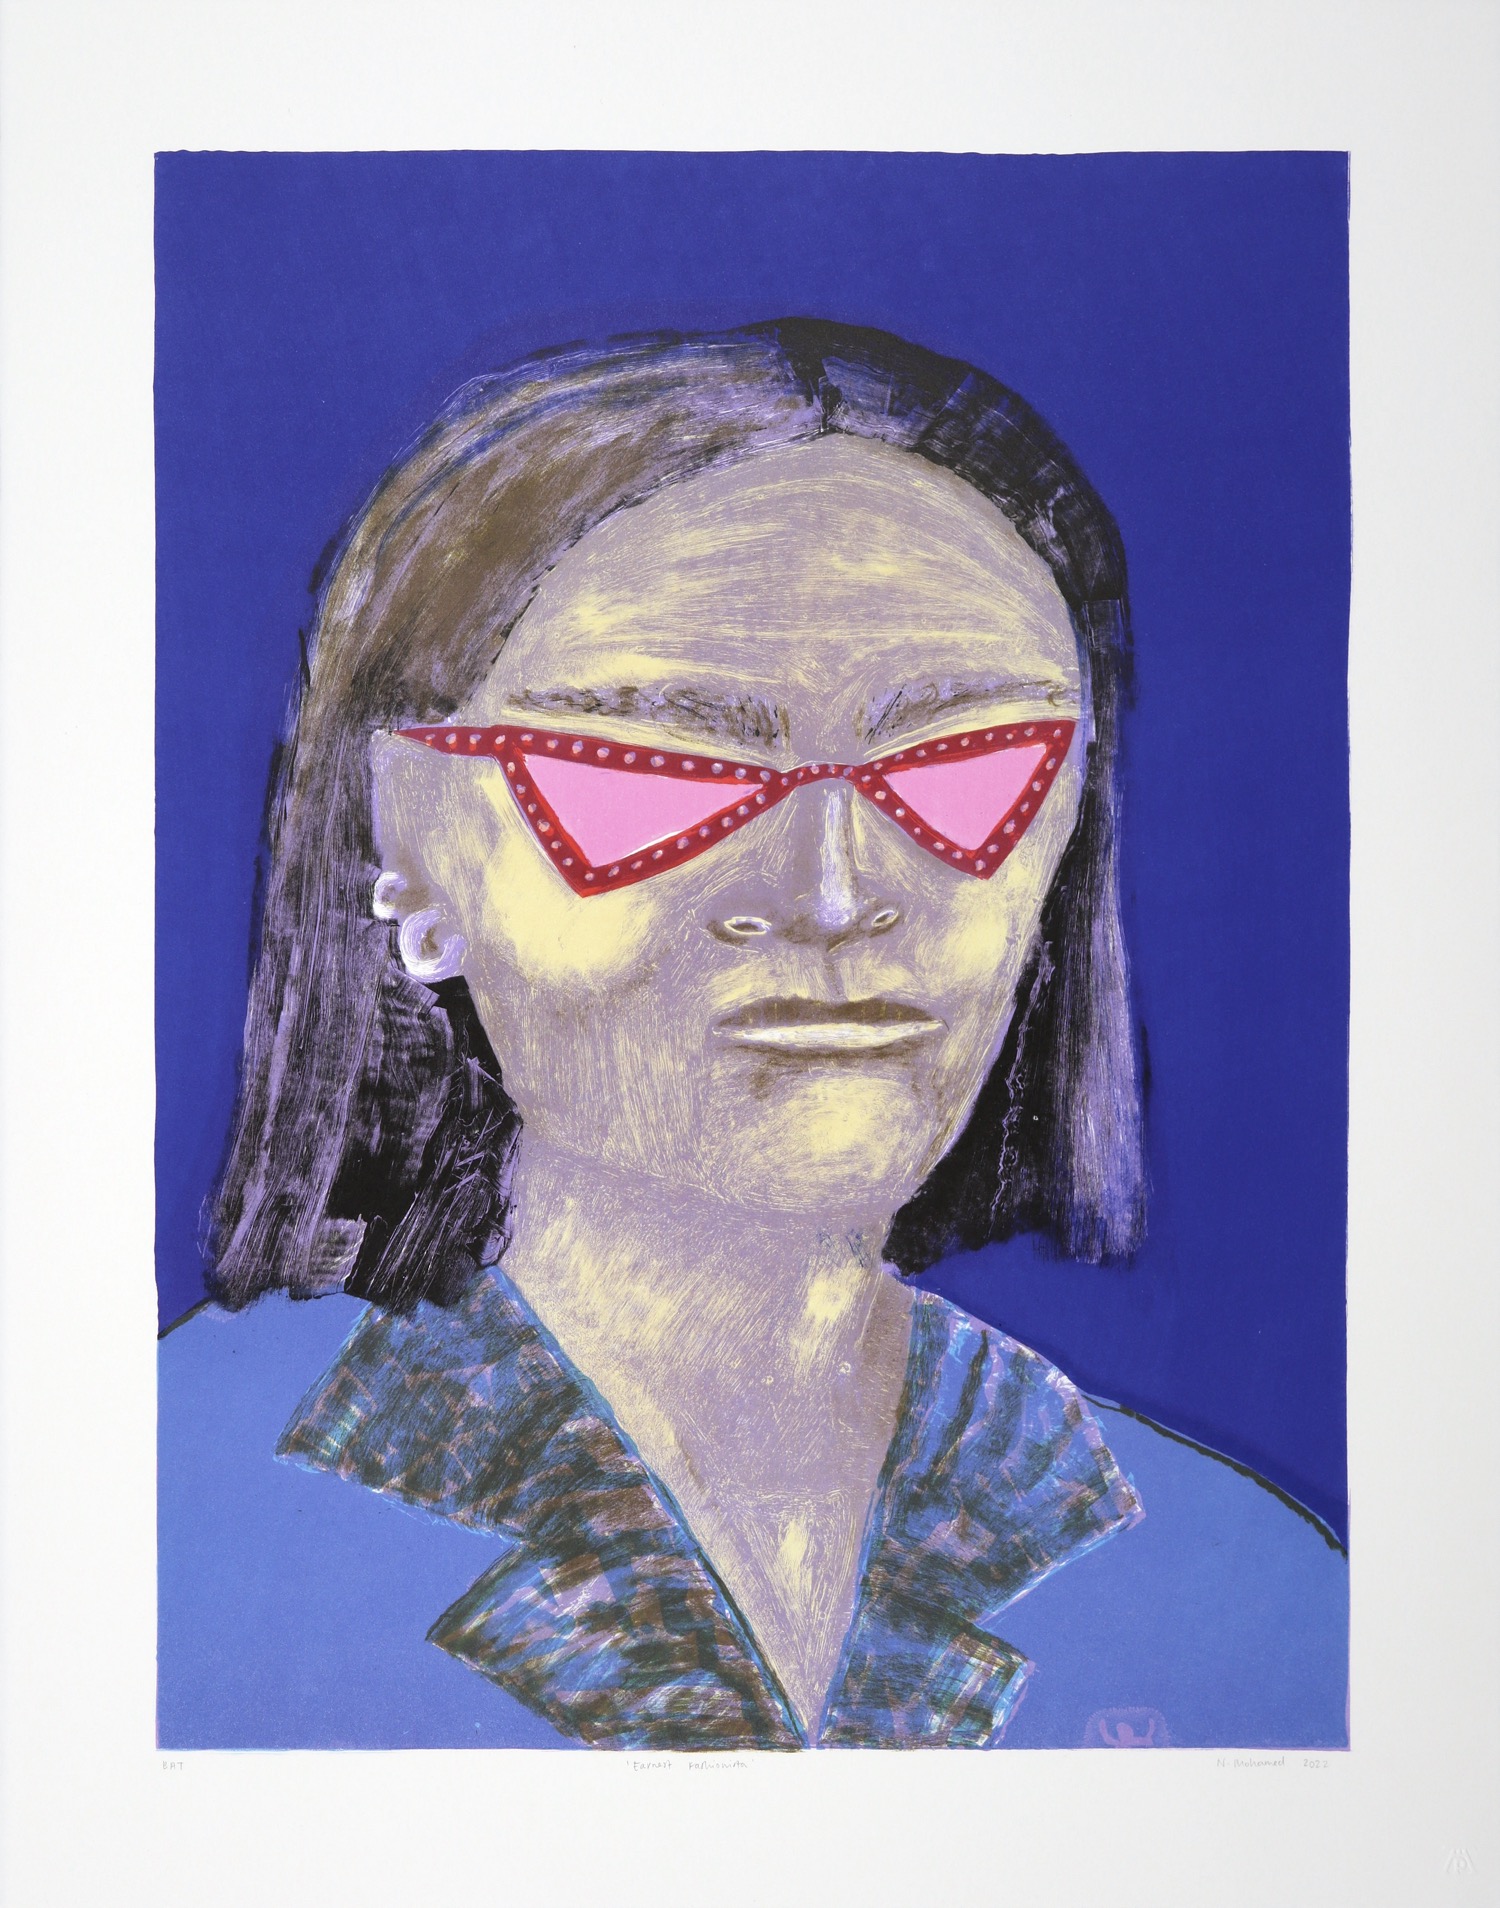 Clour lithograph of fashionable woman wearing sunglasses by Nabeeha Mohamed